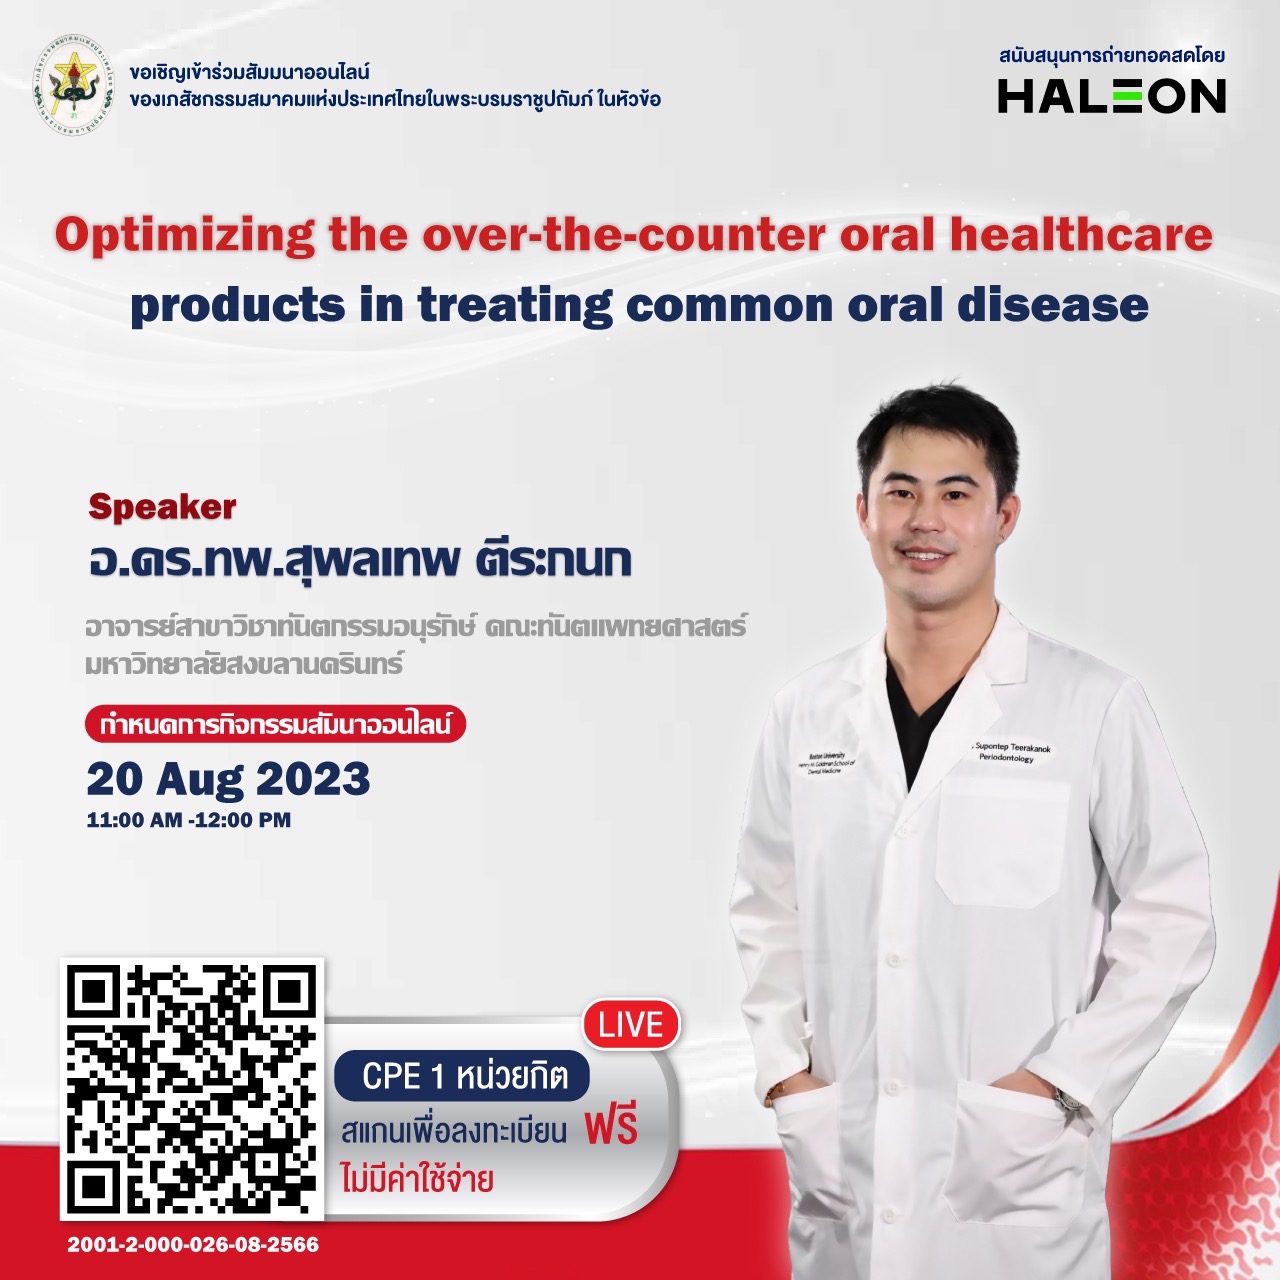 (Online) “Optimizing the over-the-counter oral healthcare products in treating common oral disease” 20 Aug 2023